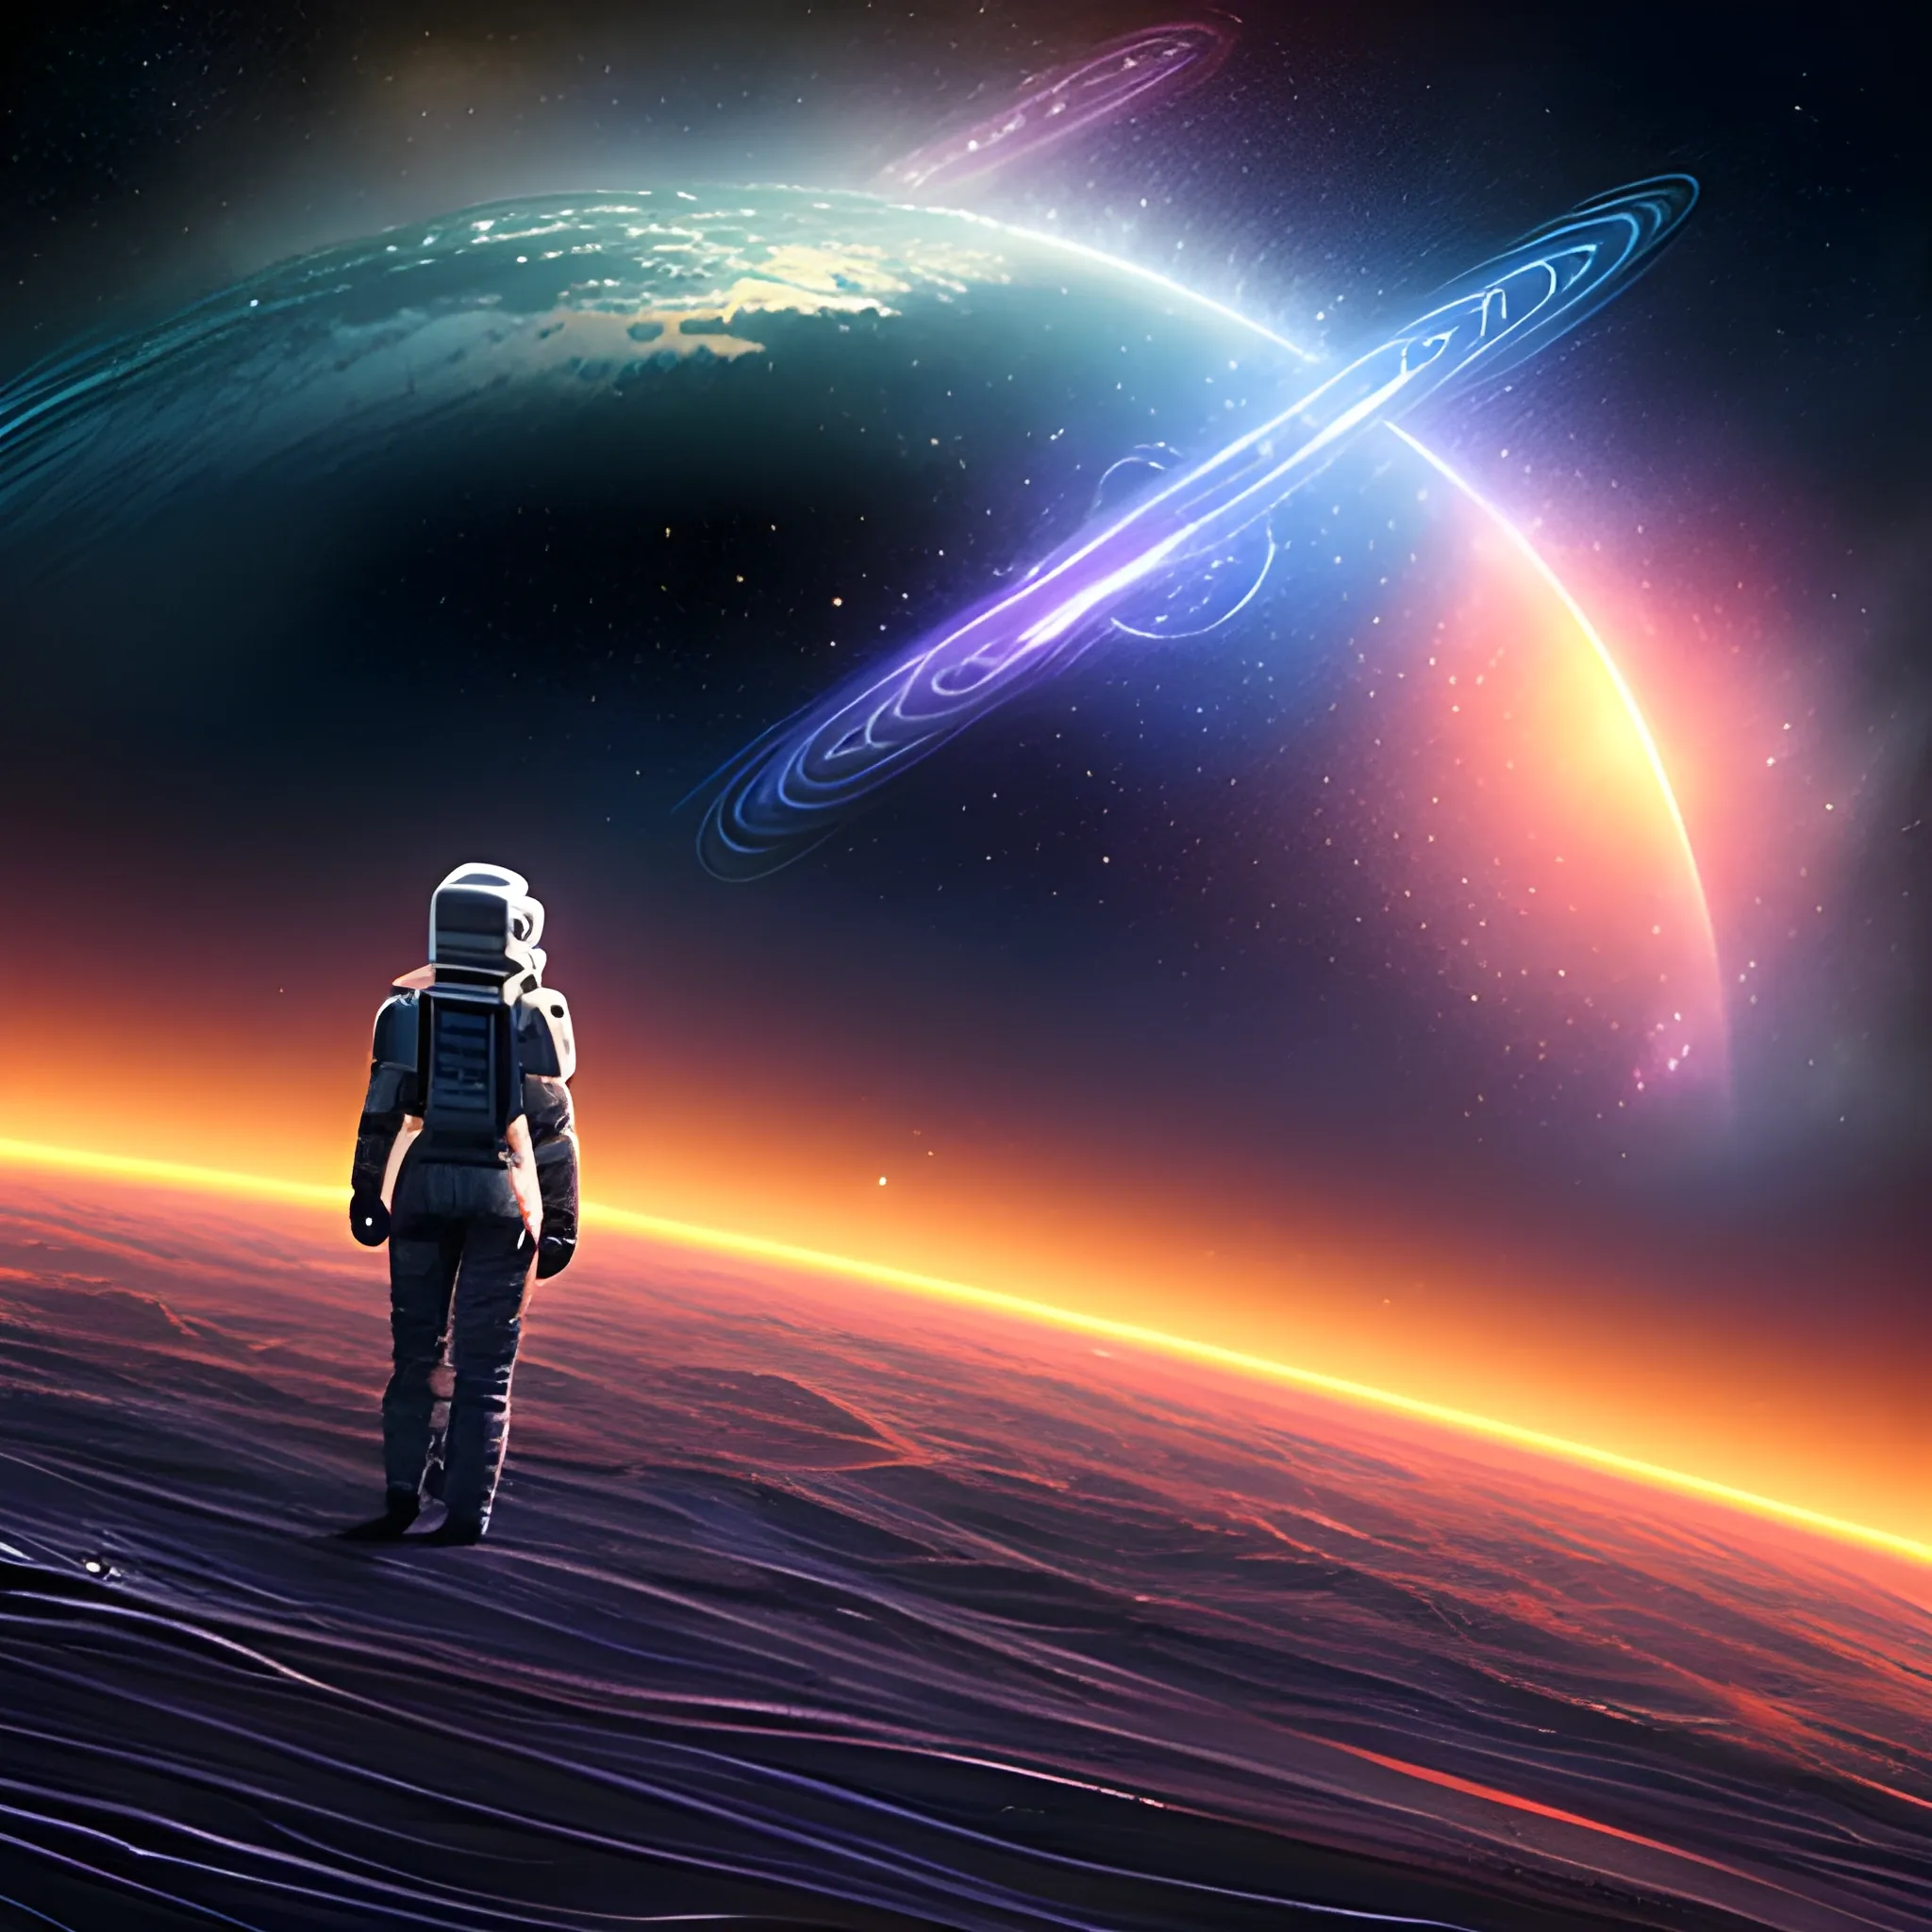 Amidst the vast cosmos, at the midway point of an interstellar journey,, 3D